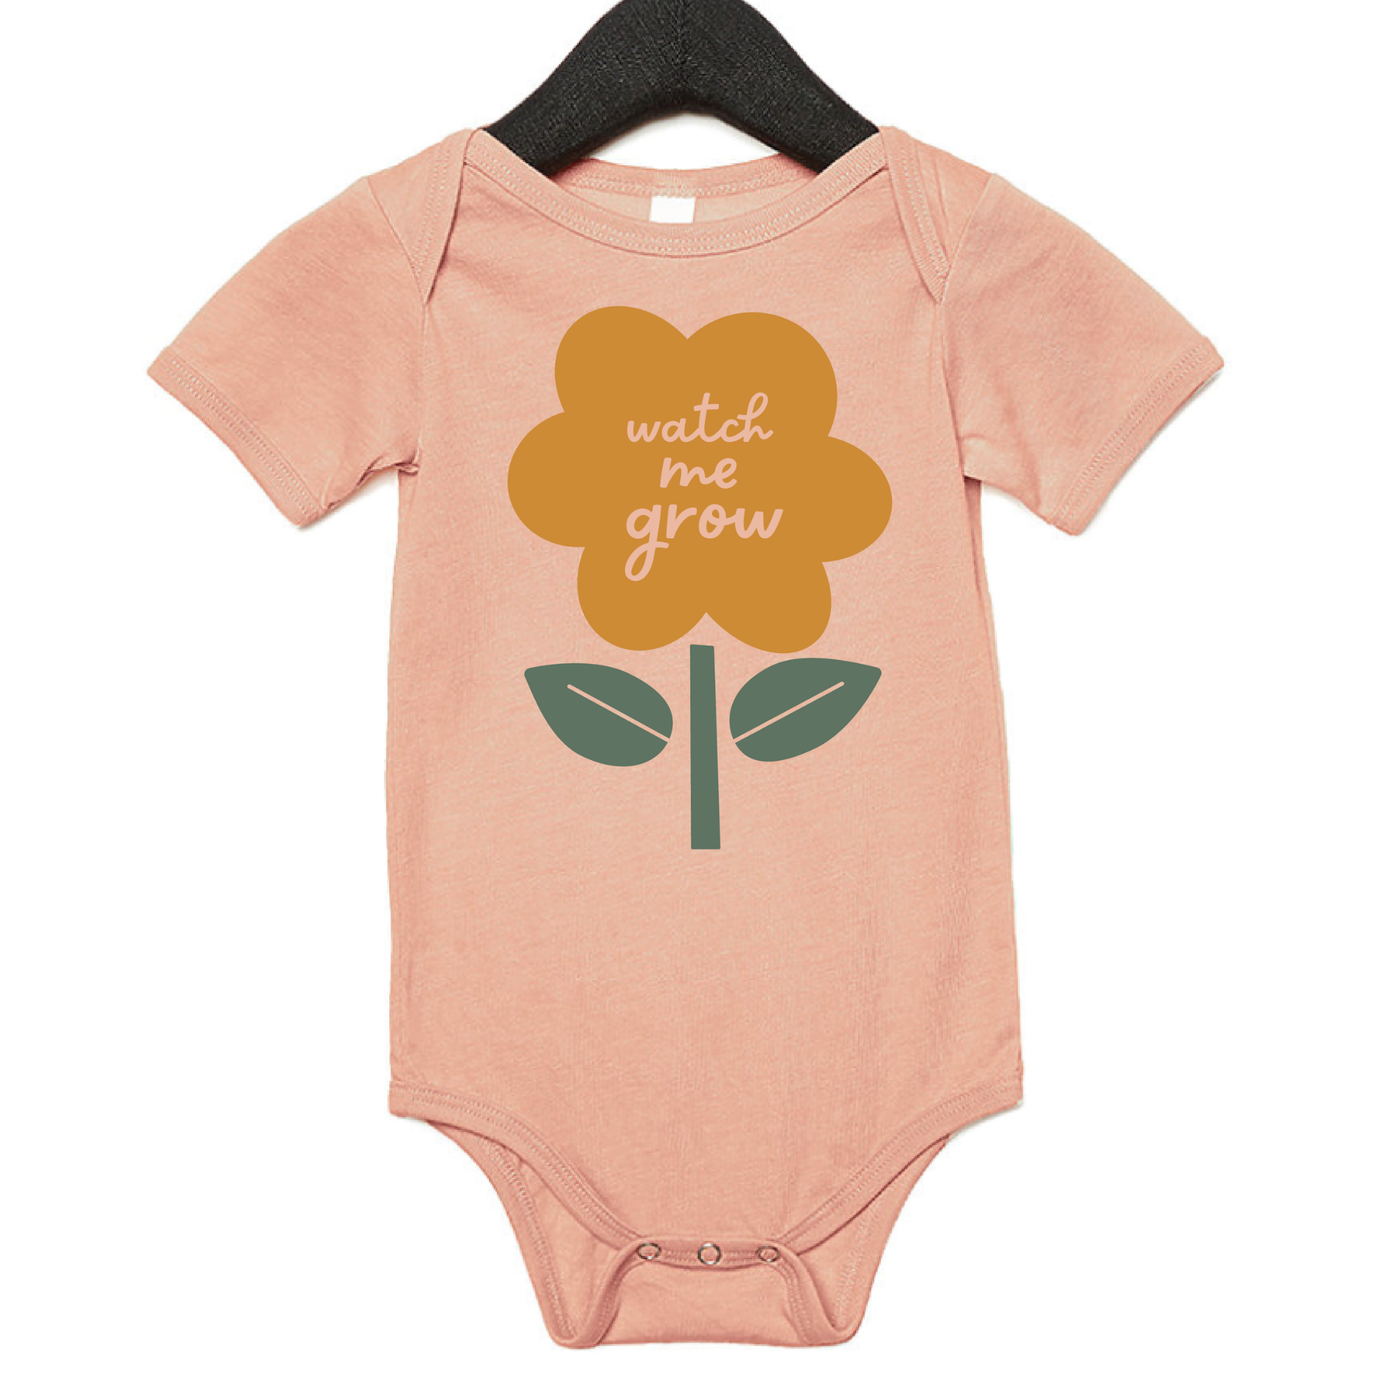 Watch Me Grow Baby Onesie - The Lake and Company